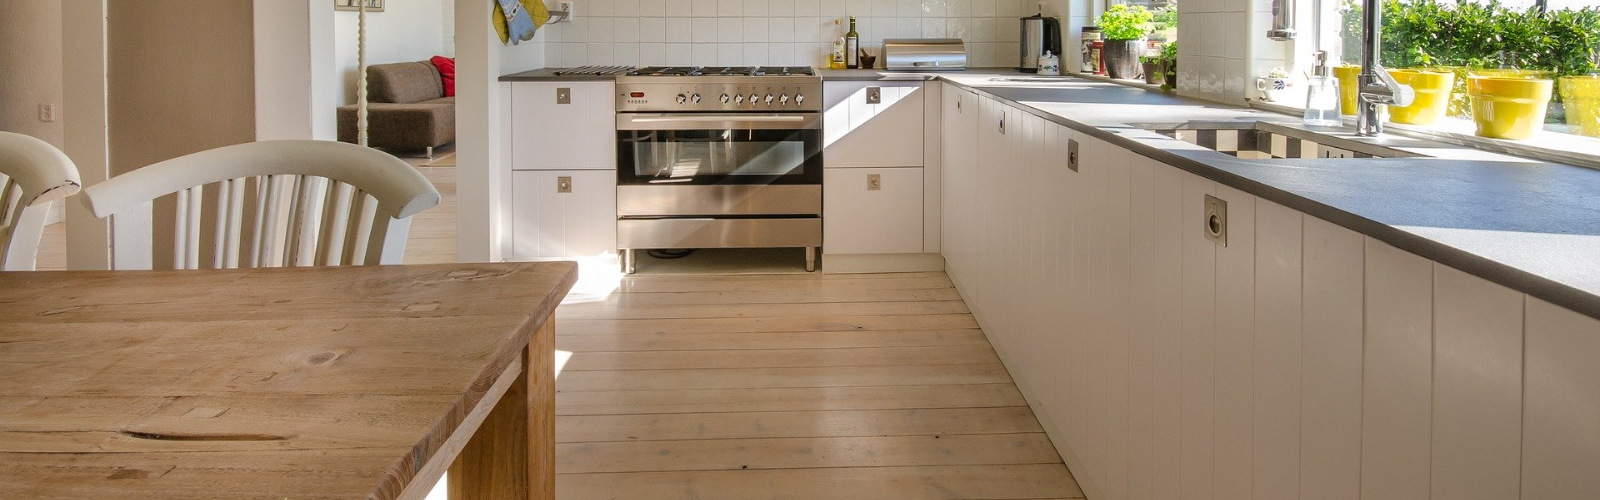 Image of laminate flooring in kitchen with sunset lighting